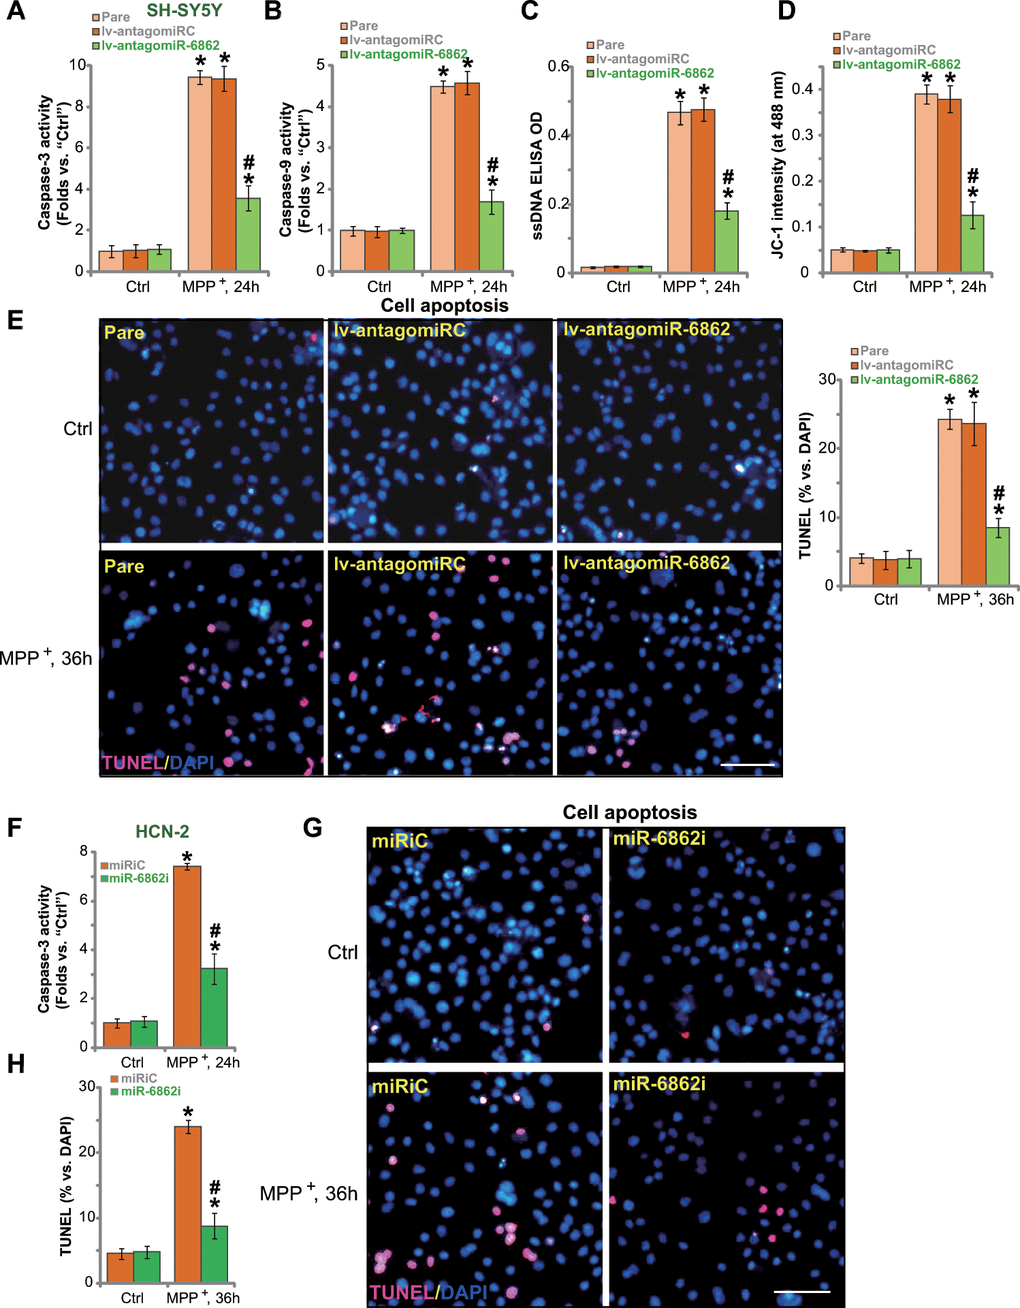 miR-6862 inhibition attenuates MPP+-induced apoptosis in neuronal cells. Parental control SH-SY5Y cells (“Pare”) as well as stable SH-SY5Y cells, expressing the lentiviral construct encoding the anti-sense of premiR-6862 (lv-antagomiR-6862) or the anti-sense control sequence (lv-antagomiRC), were treated with or without MPP+ (3 mM); Cells were then cultured for applied time periods, the caspase-3/-9 activity (A, B), single strand DNA (ssDNA) contents (C) and mitochondrial depolarization (recording JC-1 intensity at 488 nm, D) were tested. Cell apoptosis was tested by nuclear TUNEL staining assay (E). HCN-2 neuronal cells were transfected with 500 nM of miR-6862 inhibitor (miR-6862i) or the miR inhibitor control (miRiC) for 48h. Cells were then treated with or without MPP+ (3 mM) and cultured for indicated time periods, caspase-3 activity (F) and cell apoptosis (G, H) were tested similarly. Bars stand for mean ± standard deviation (SD, n=5). * P #P + treatment in “Pare” cells or “miRiC” cells. Experiments in this figure were repeated five times, with the similar results obtained. Scale bar= 100 μm (E, G).